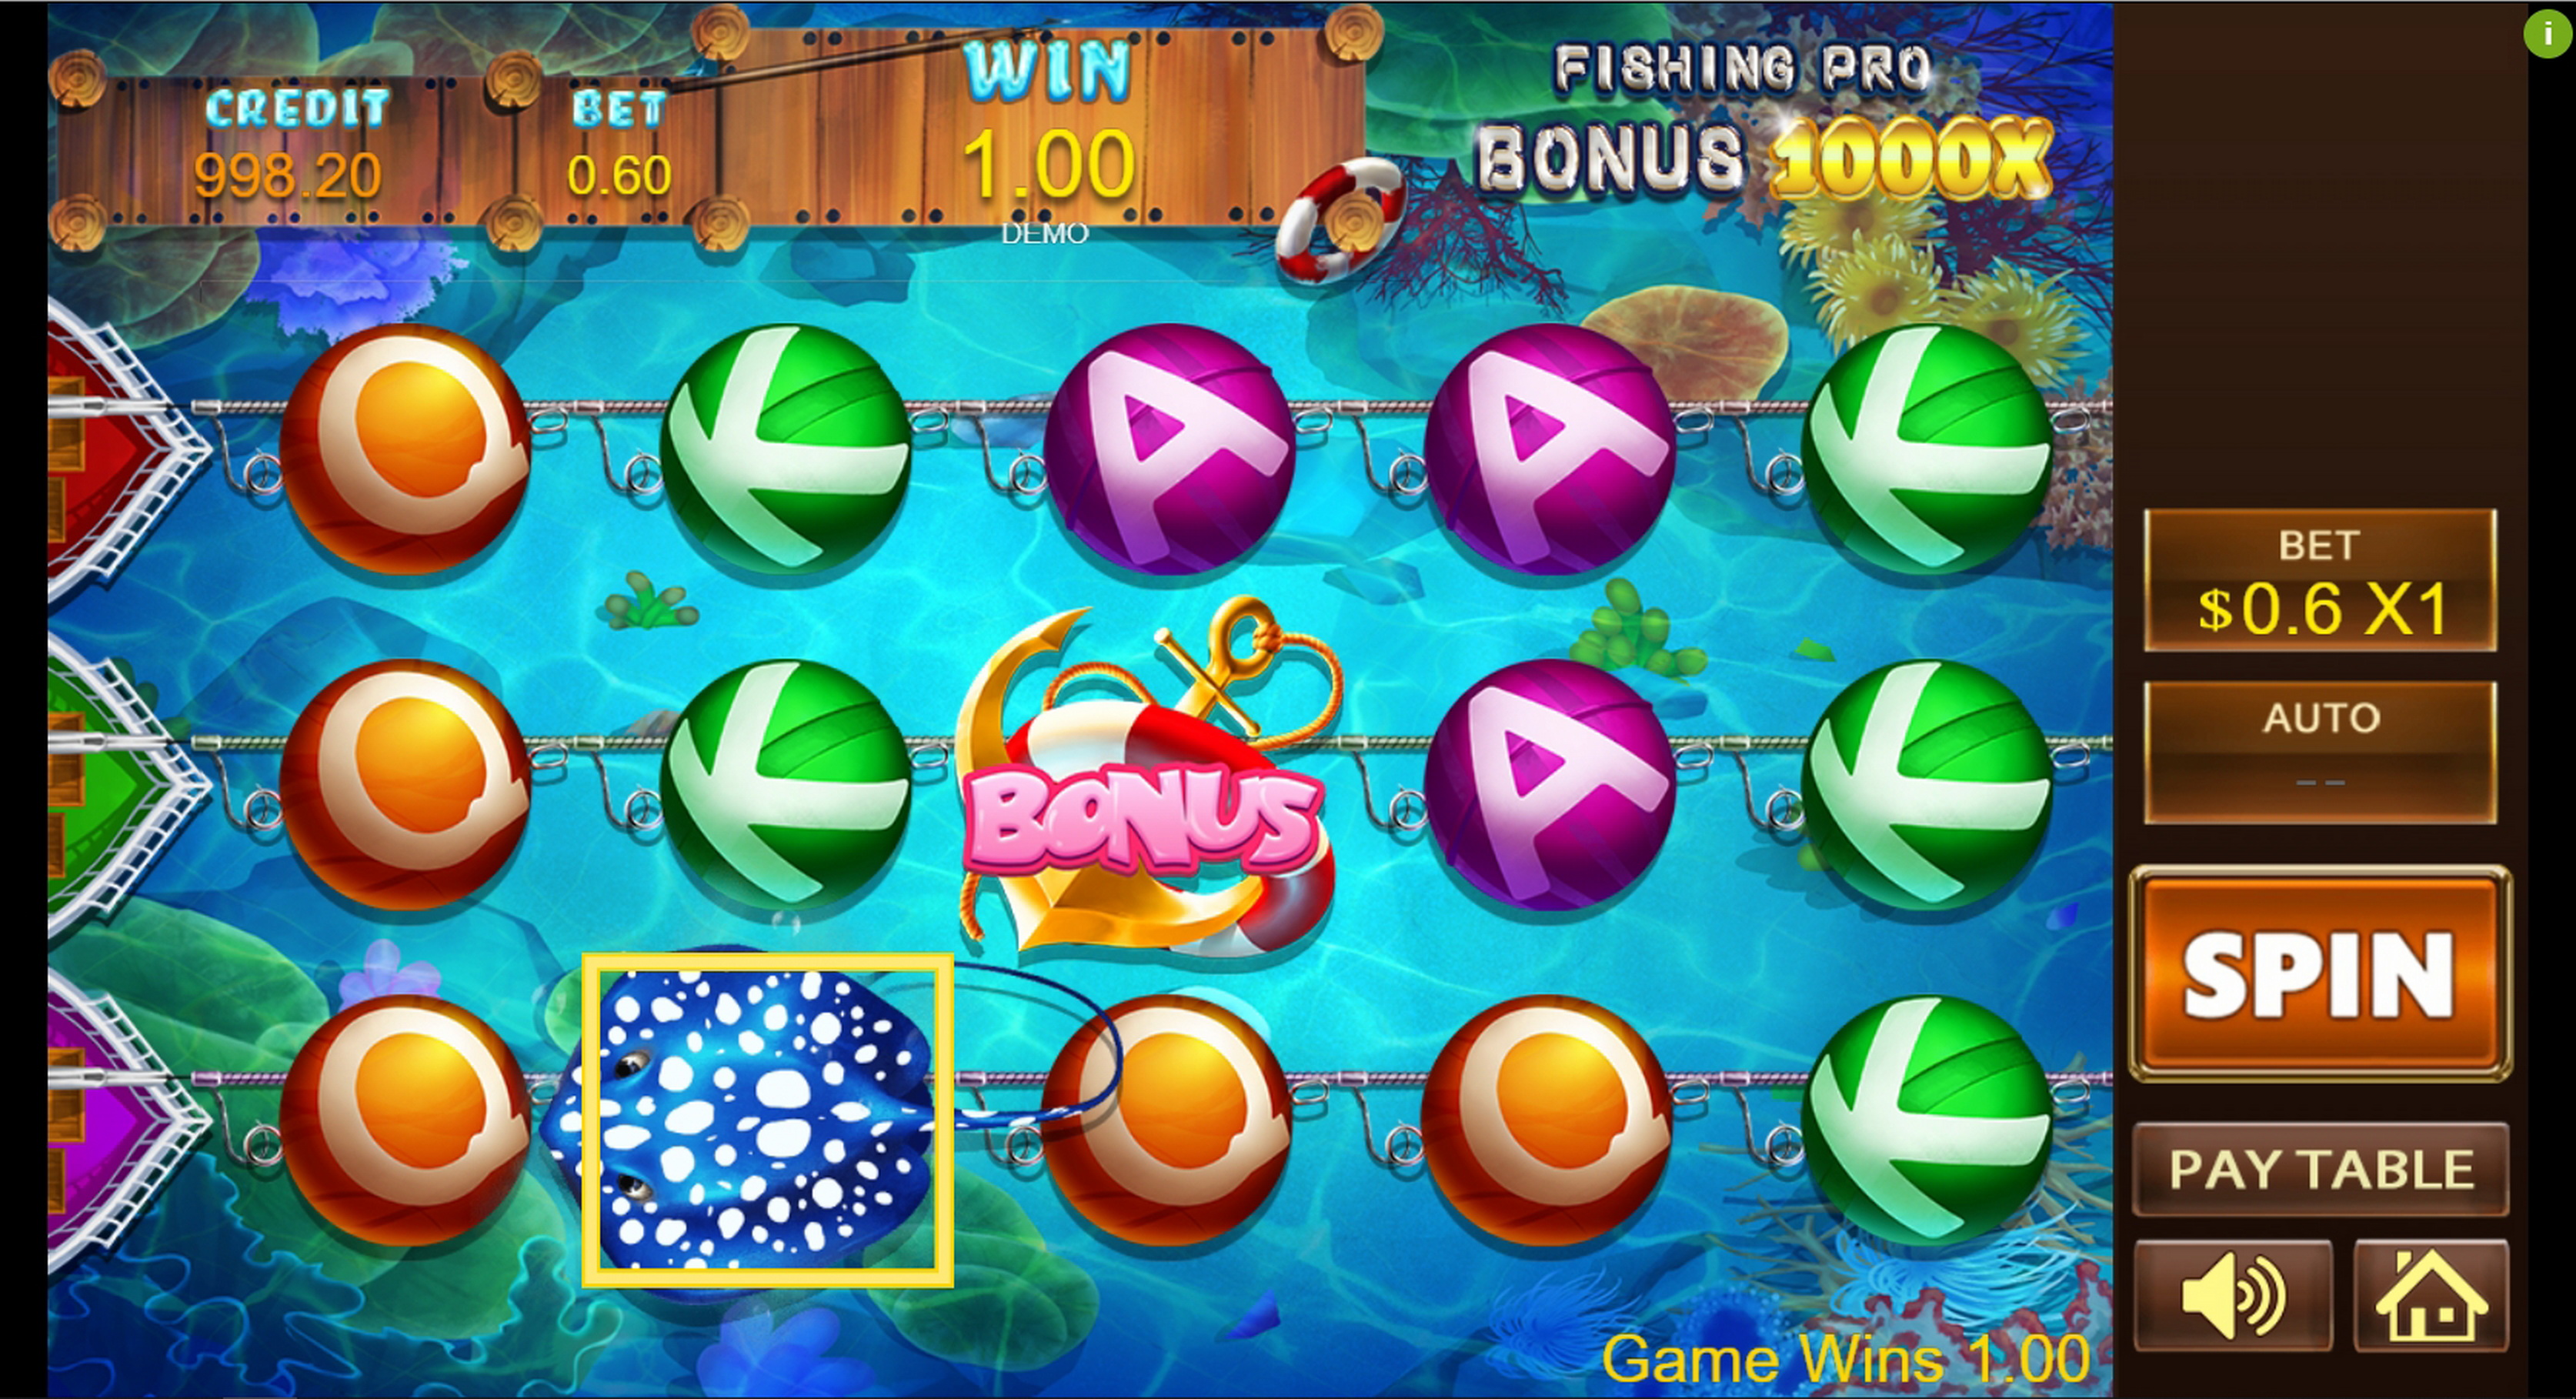 Win Money in Fishing Pro Free Slot Game by PlayStar